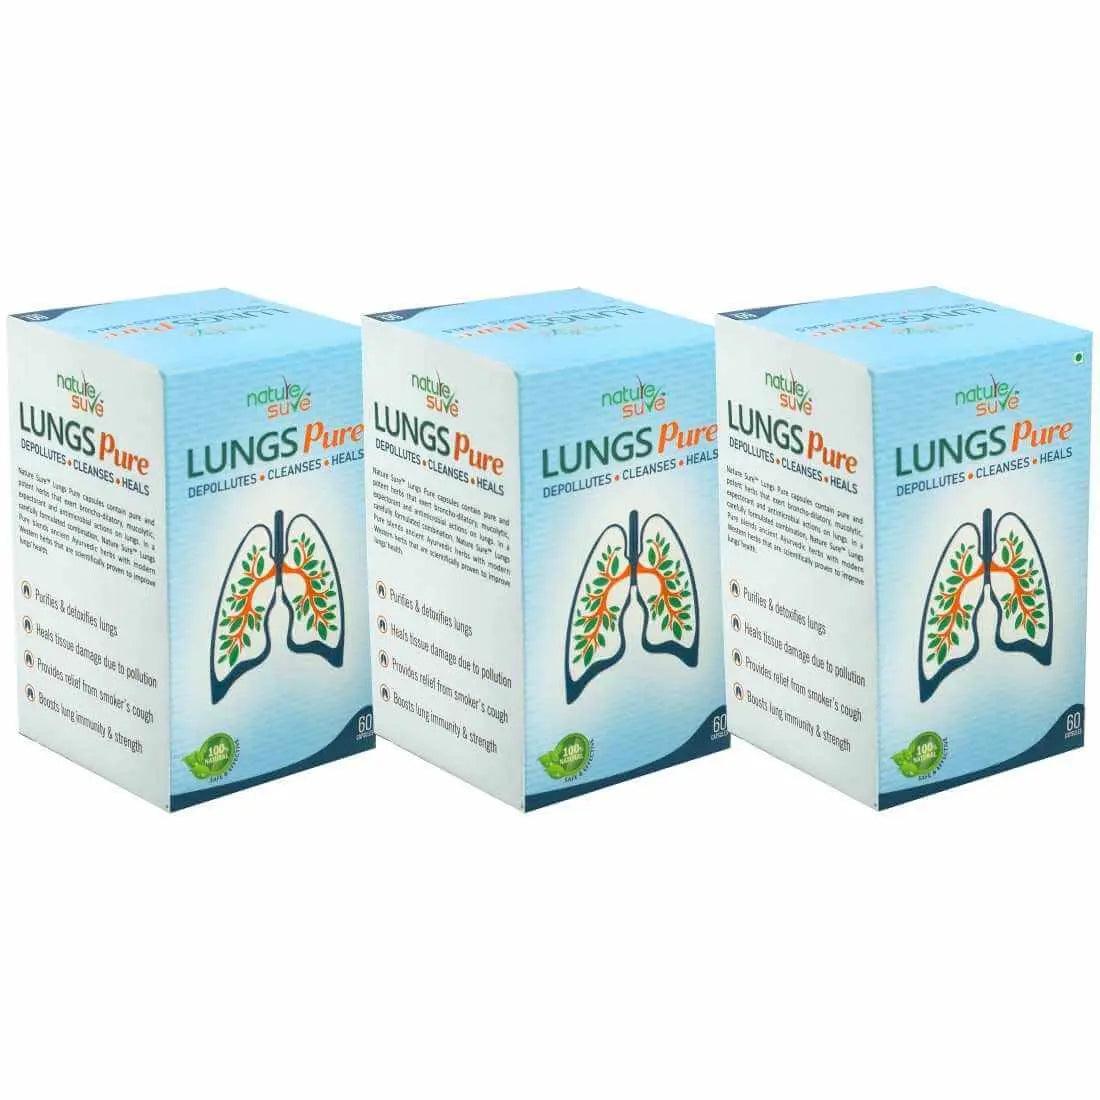 Nature Sure Lungs Pure for Protection Against Pollution, Smoke & Respiratory Health Problems - 60 Capsules 8903540009477